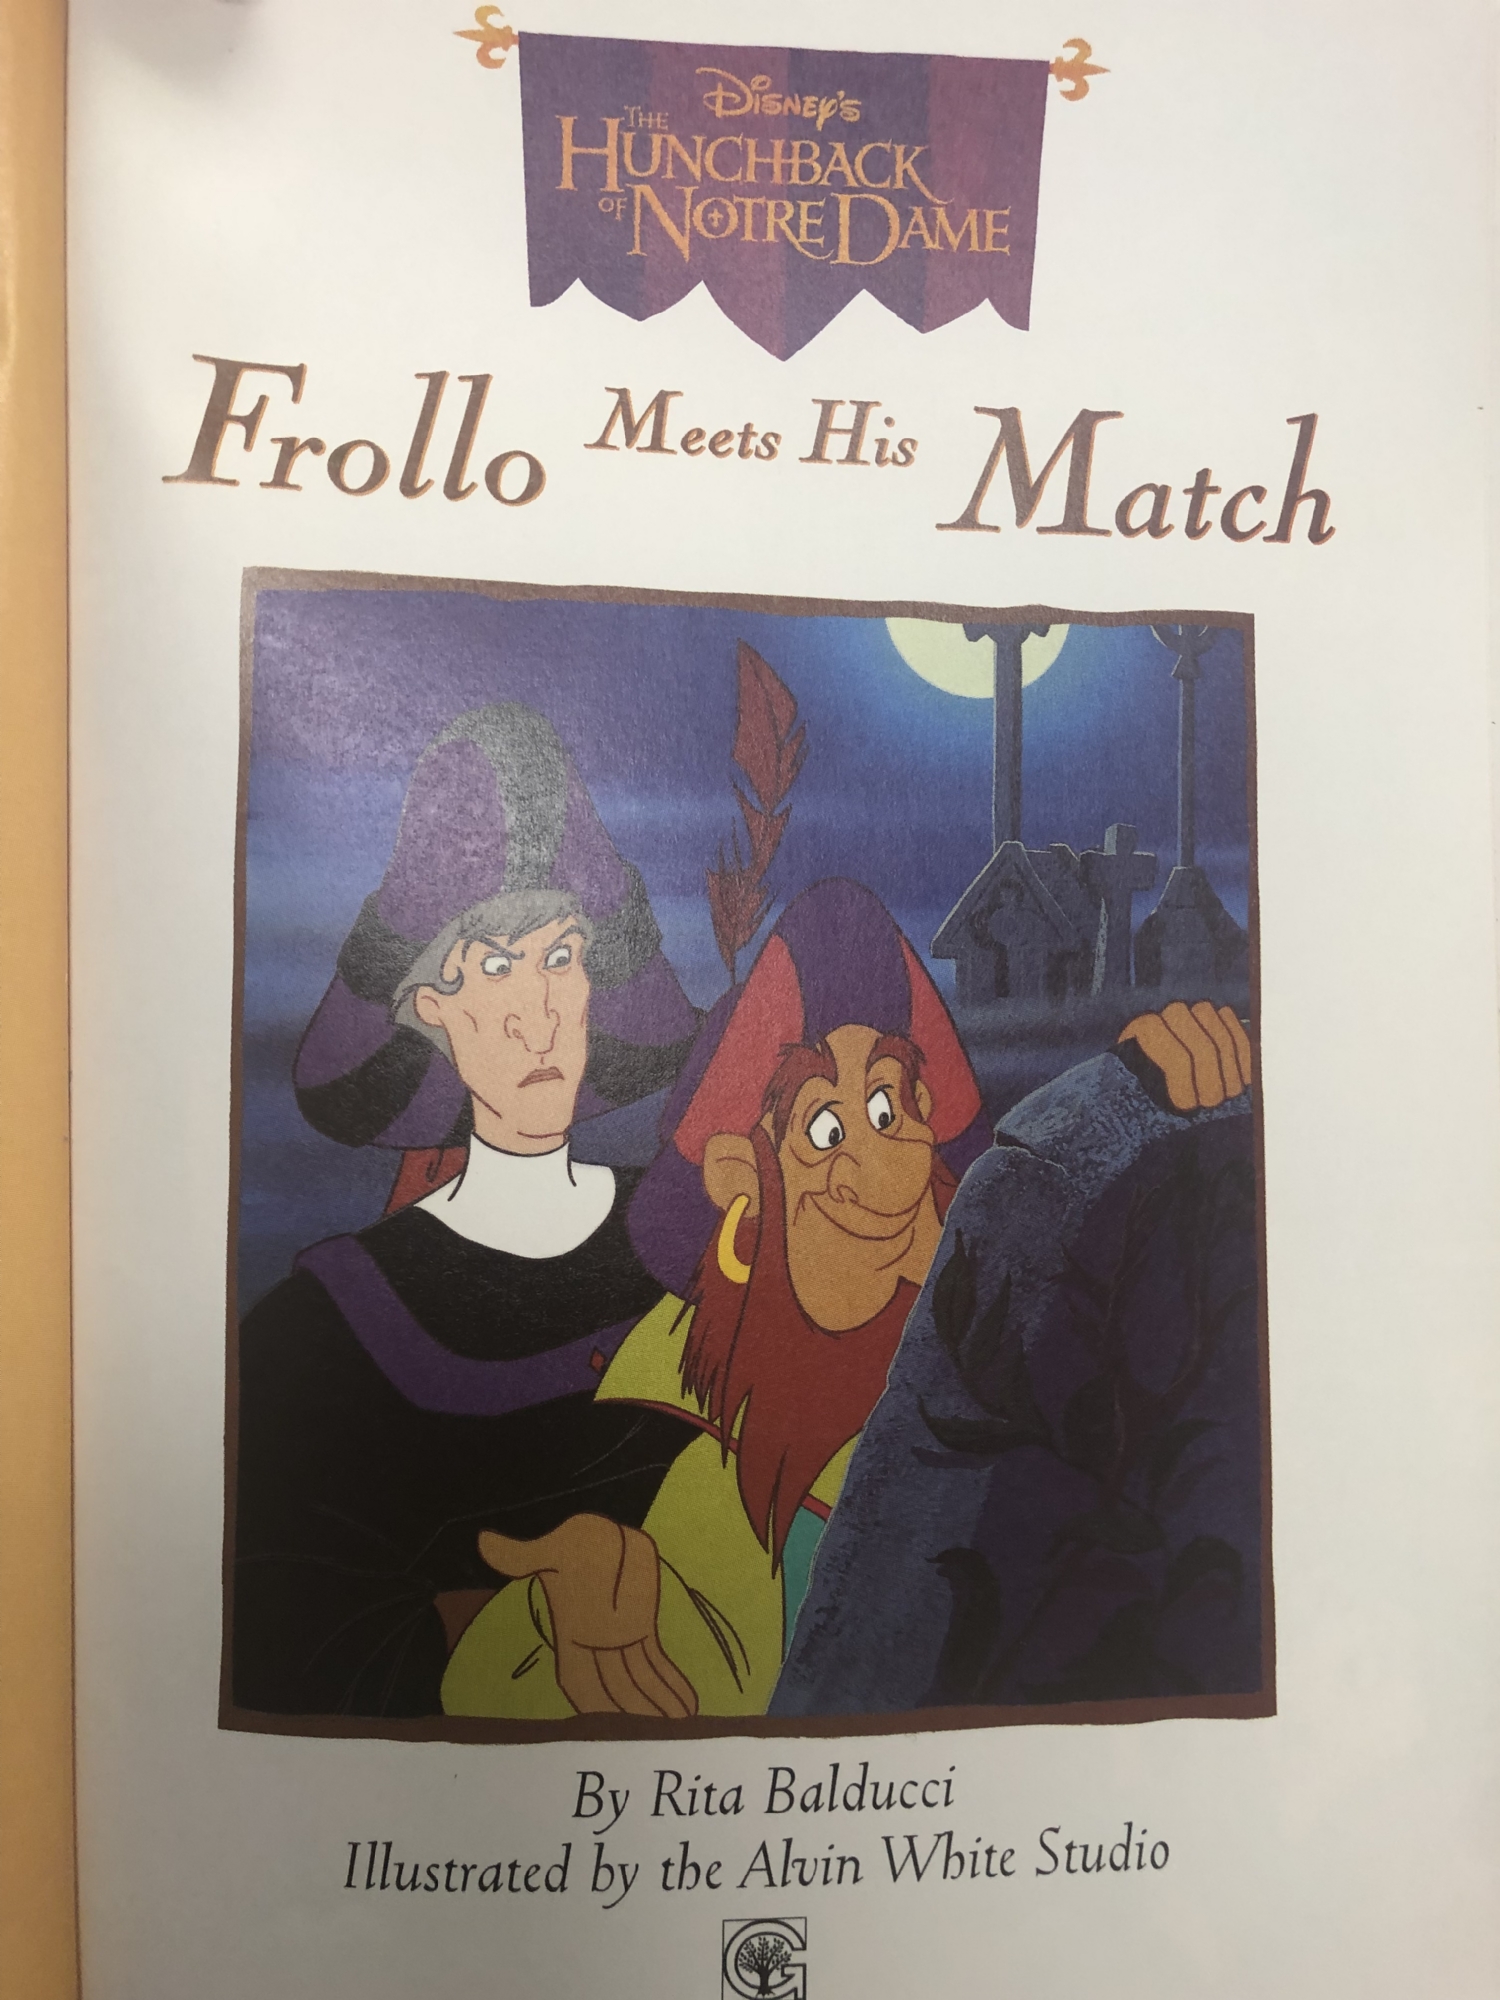 The Hunchback of Notre Dame : Book Art (Disney, c. 1990s) Frollo Meets